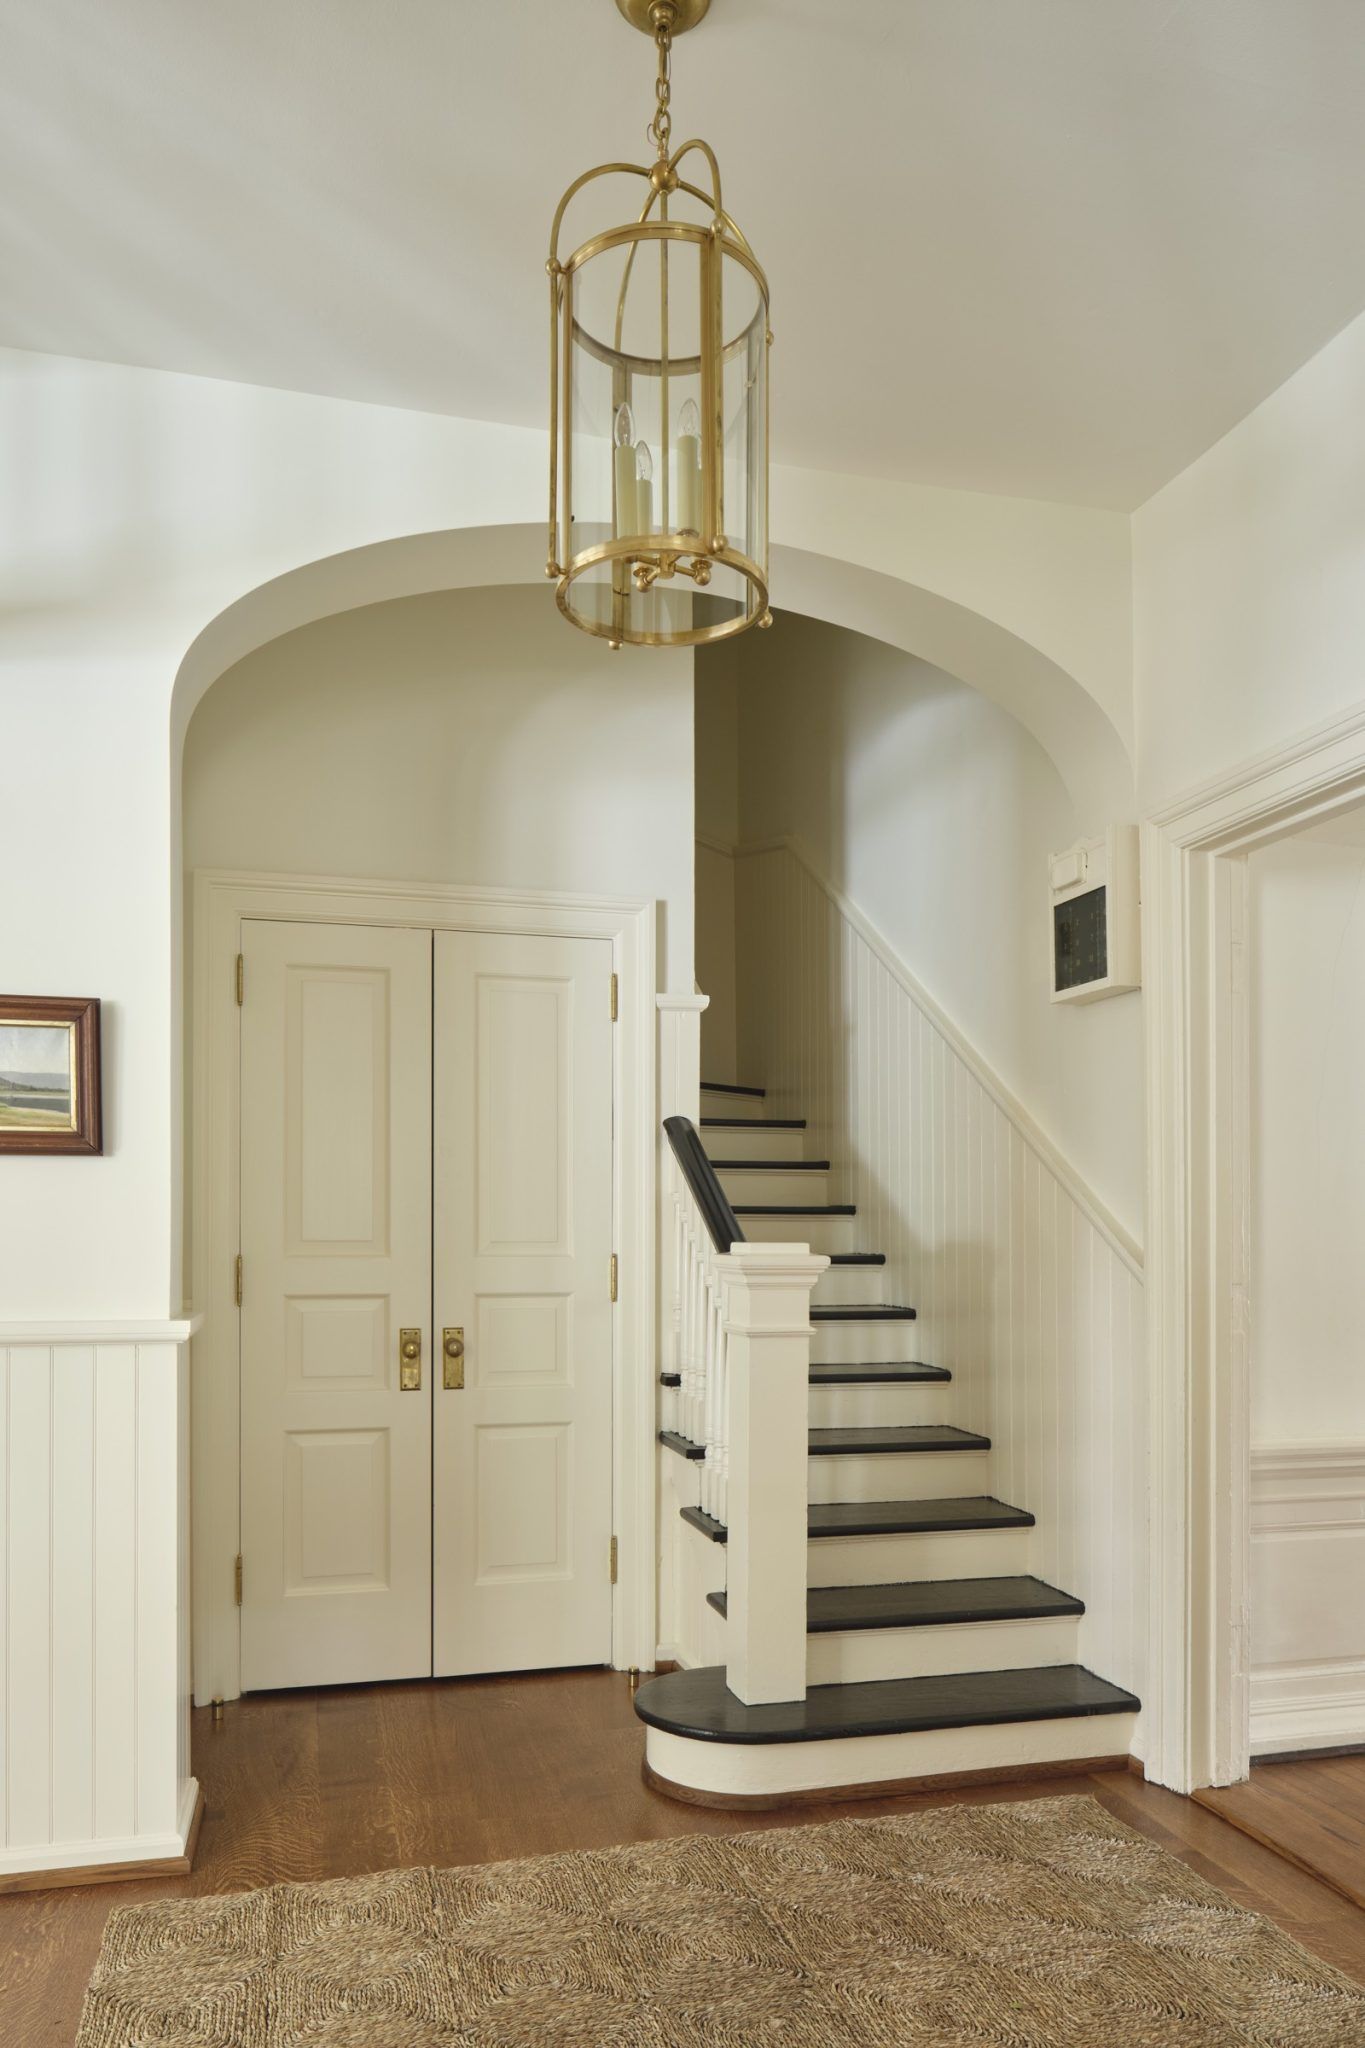 Neoclassical Home Renovation How to Bring Traditional Charm into Your Modern Space